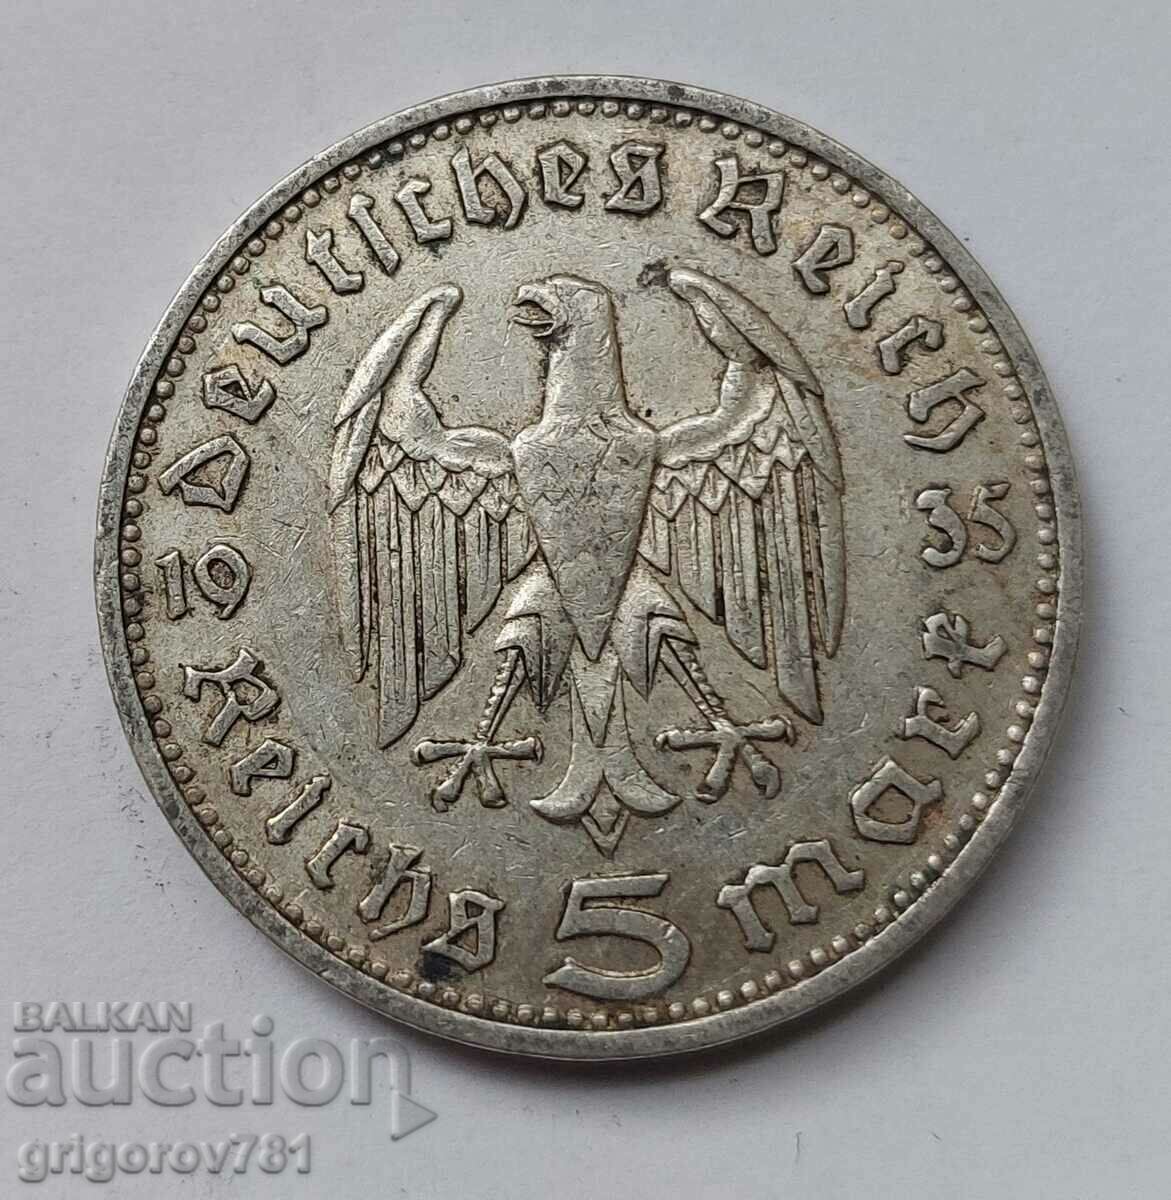 5 Mark Silver Germany 1935 D III Reich Silver Coin #58